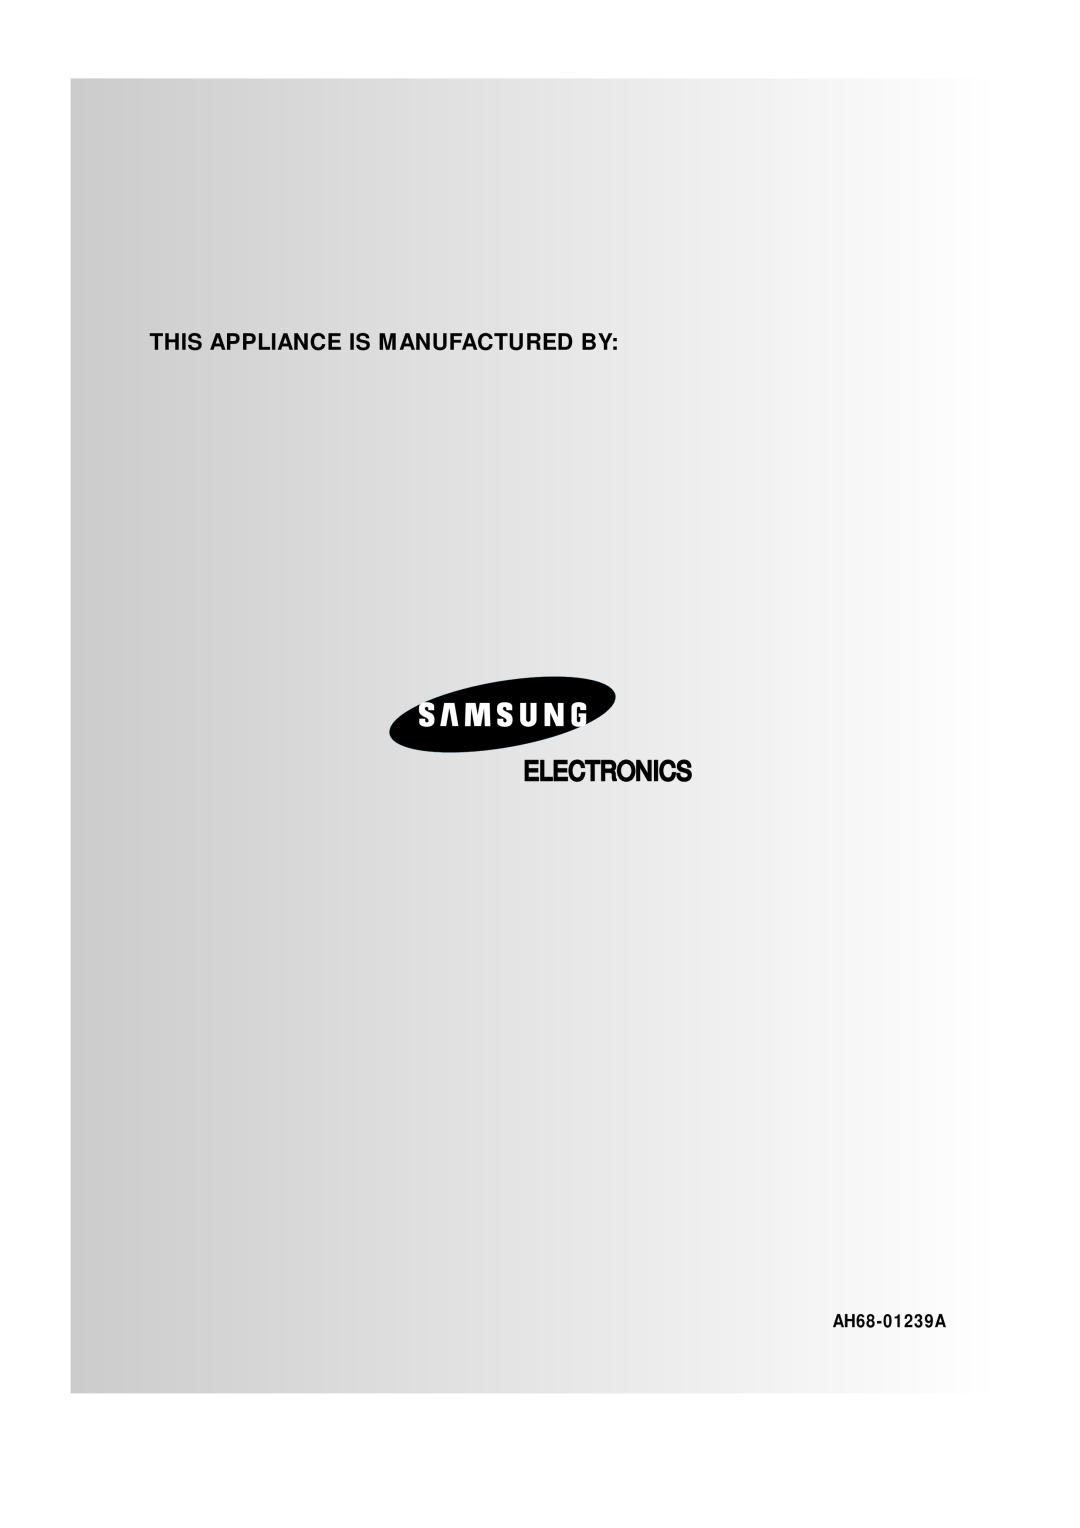 Samsung MAX-VS720 instruction manual AH68-01239A, Electronics, This Appliance Is Manufactured By 